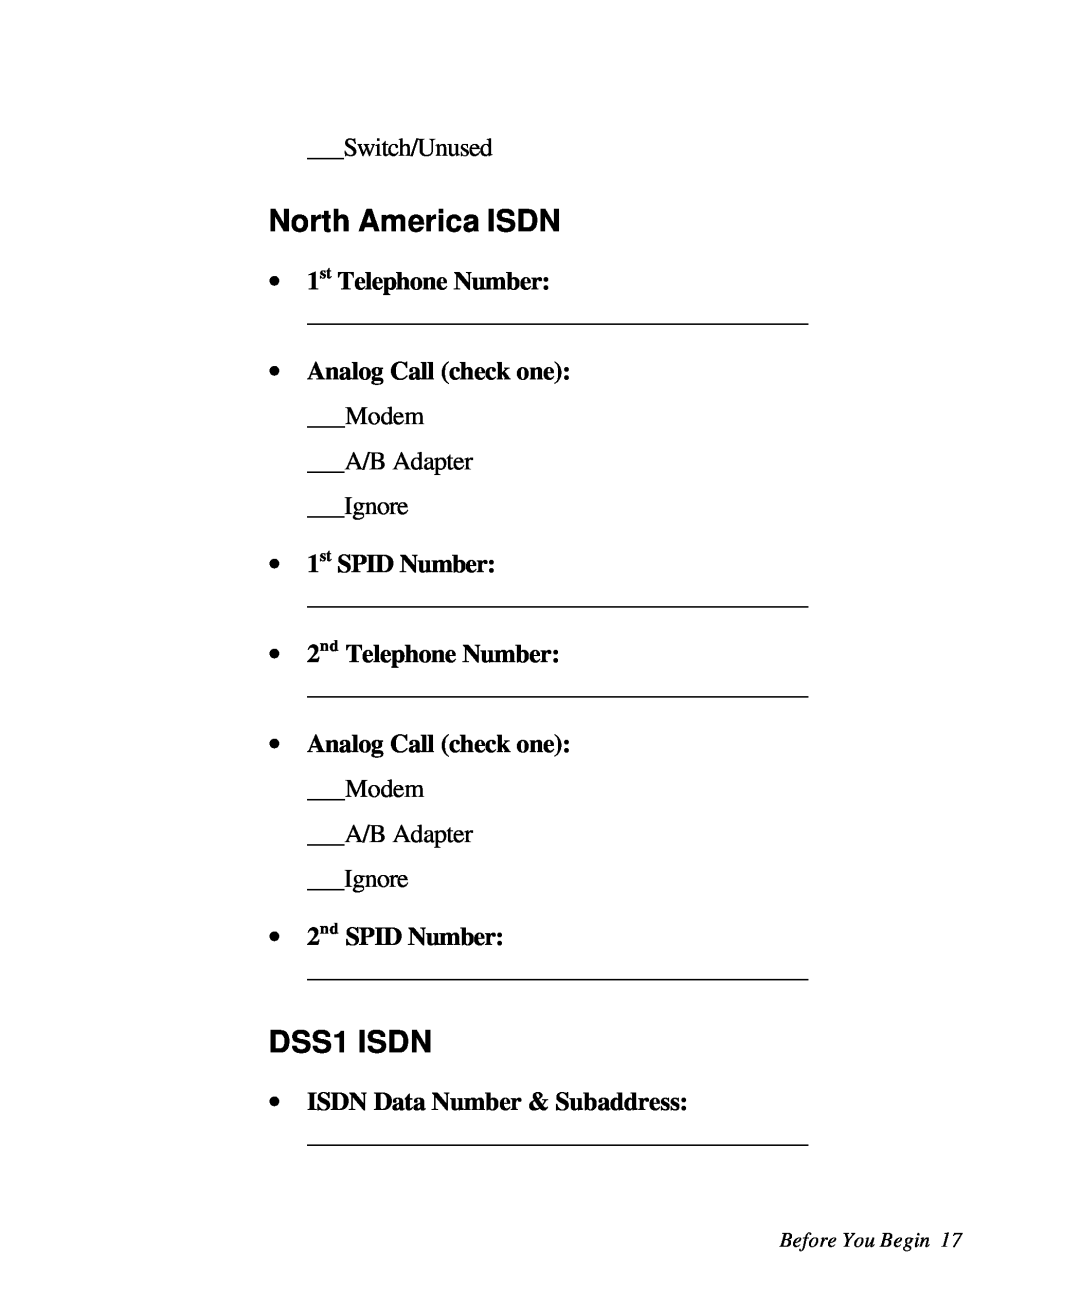 ZyXEL Communications 28641 user manual North America ISDN, DSS1 ISDN, ∙ 1st Telephone Number, ∙ Analog Call check one 